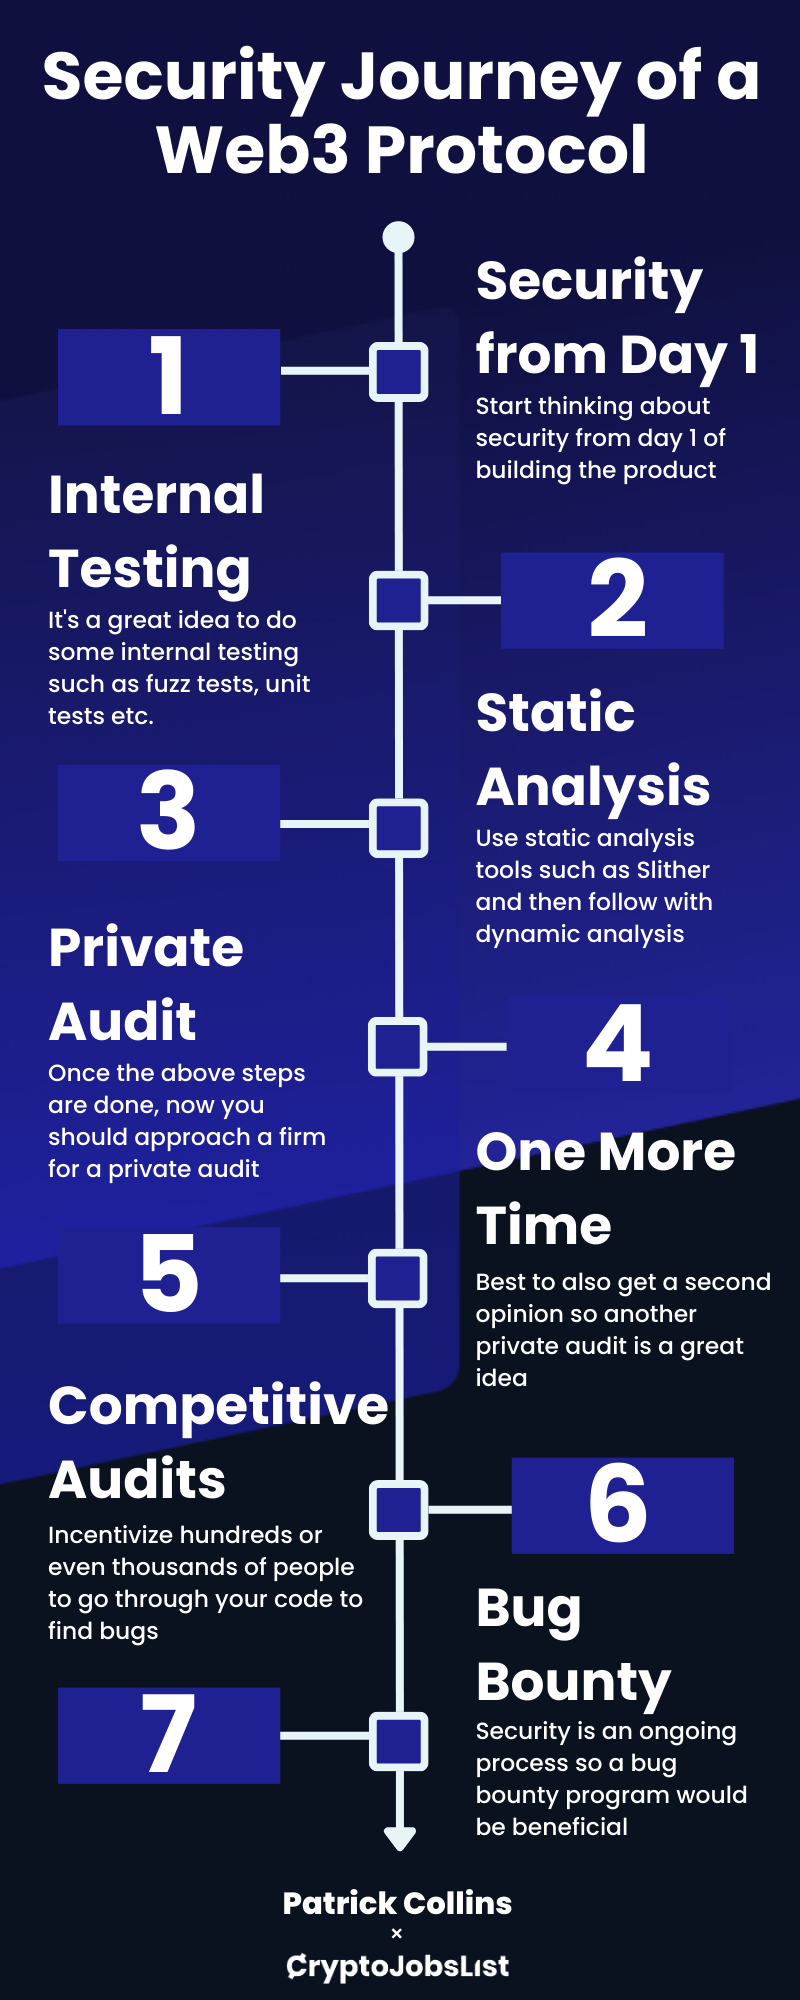 Security Journey infographic.png